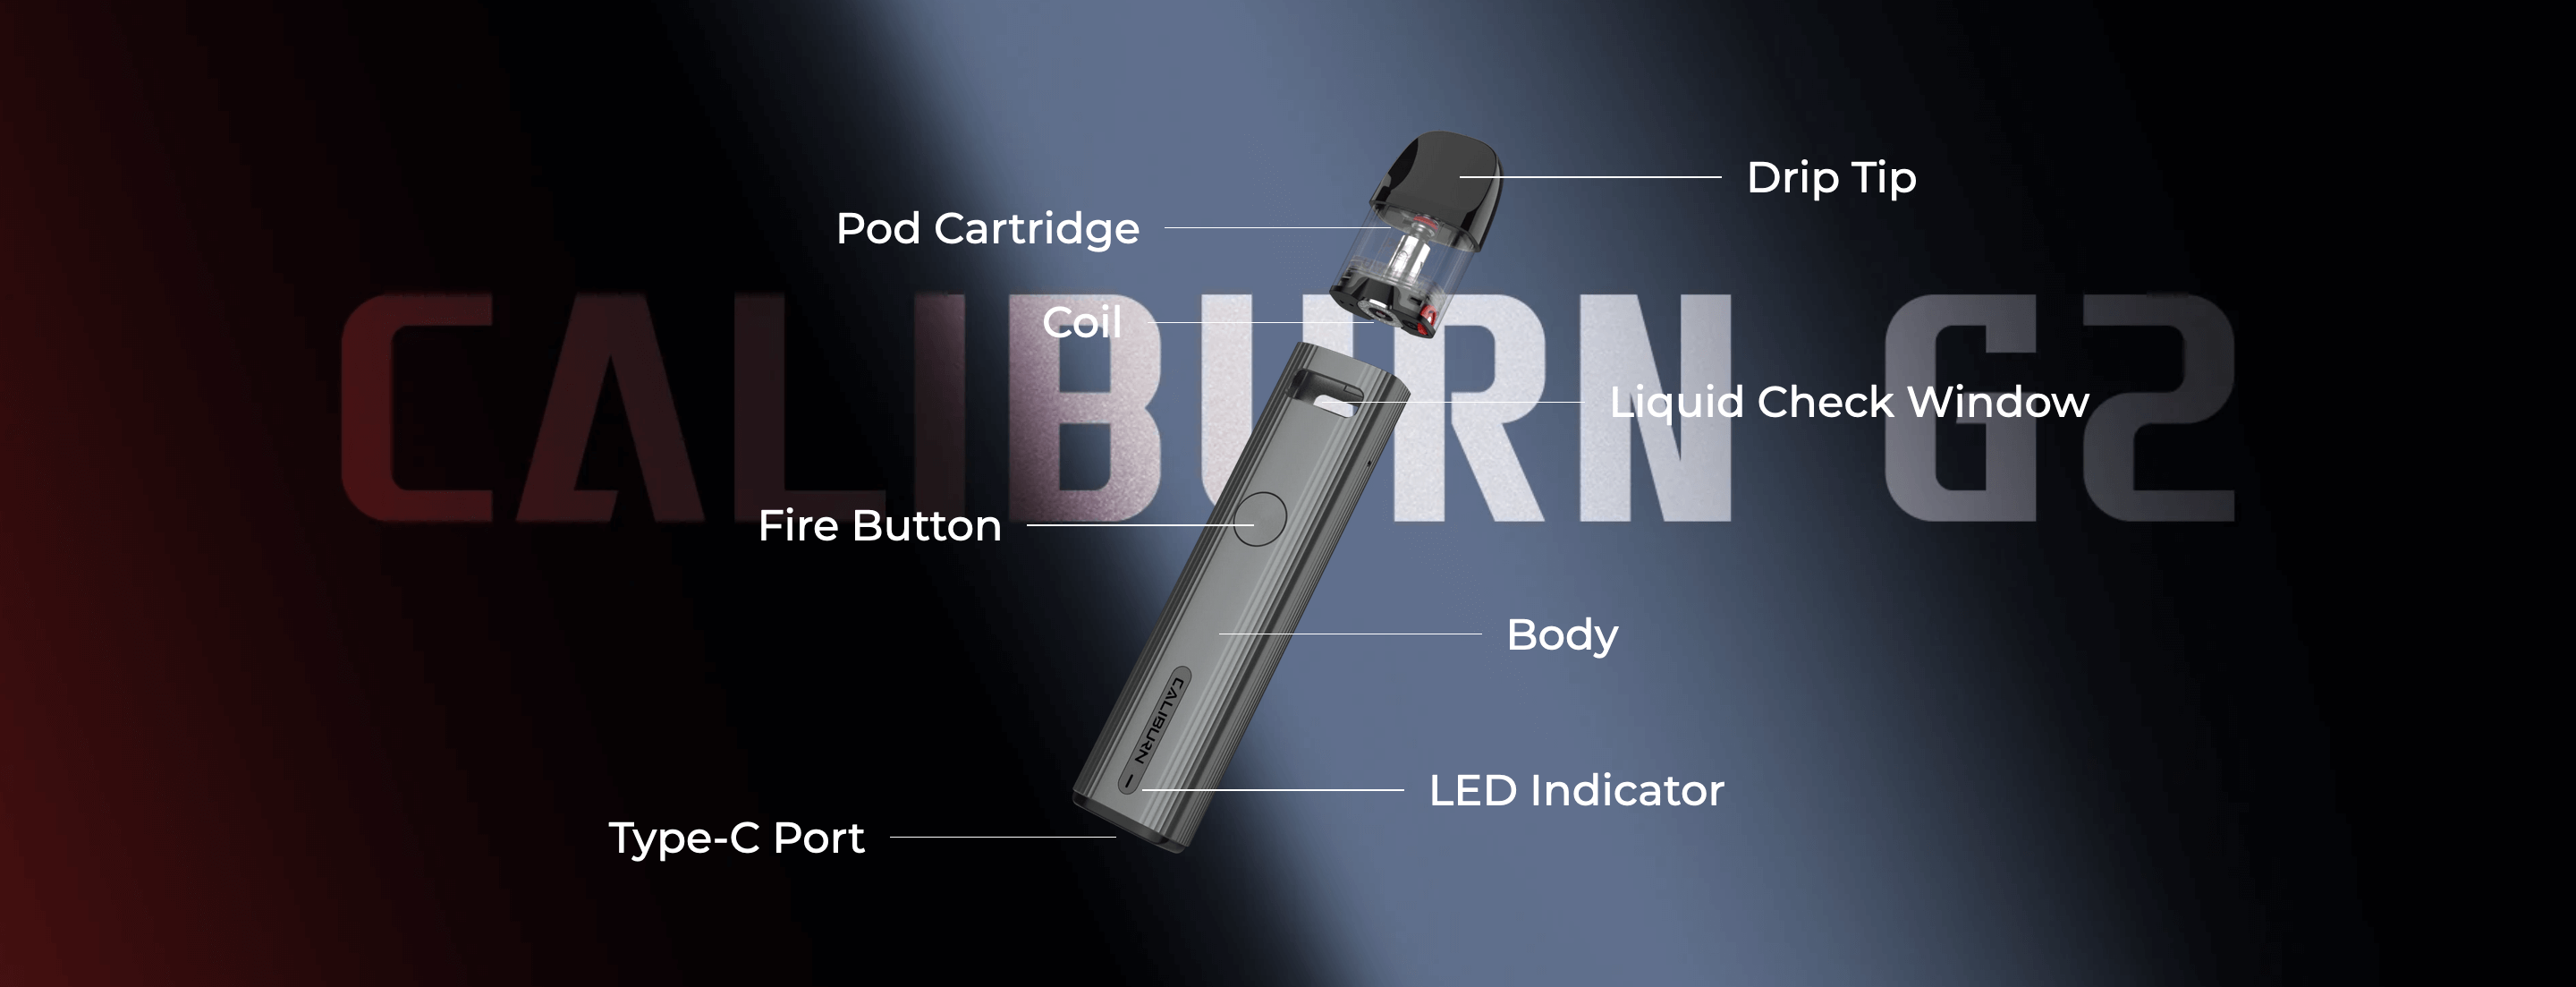 Uwell Caliburn G2 expanded view